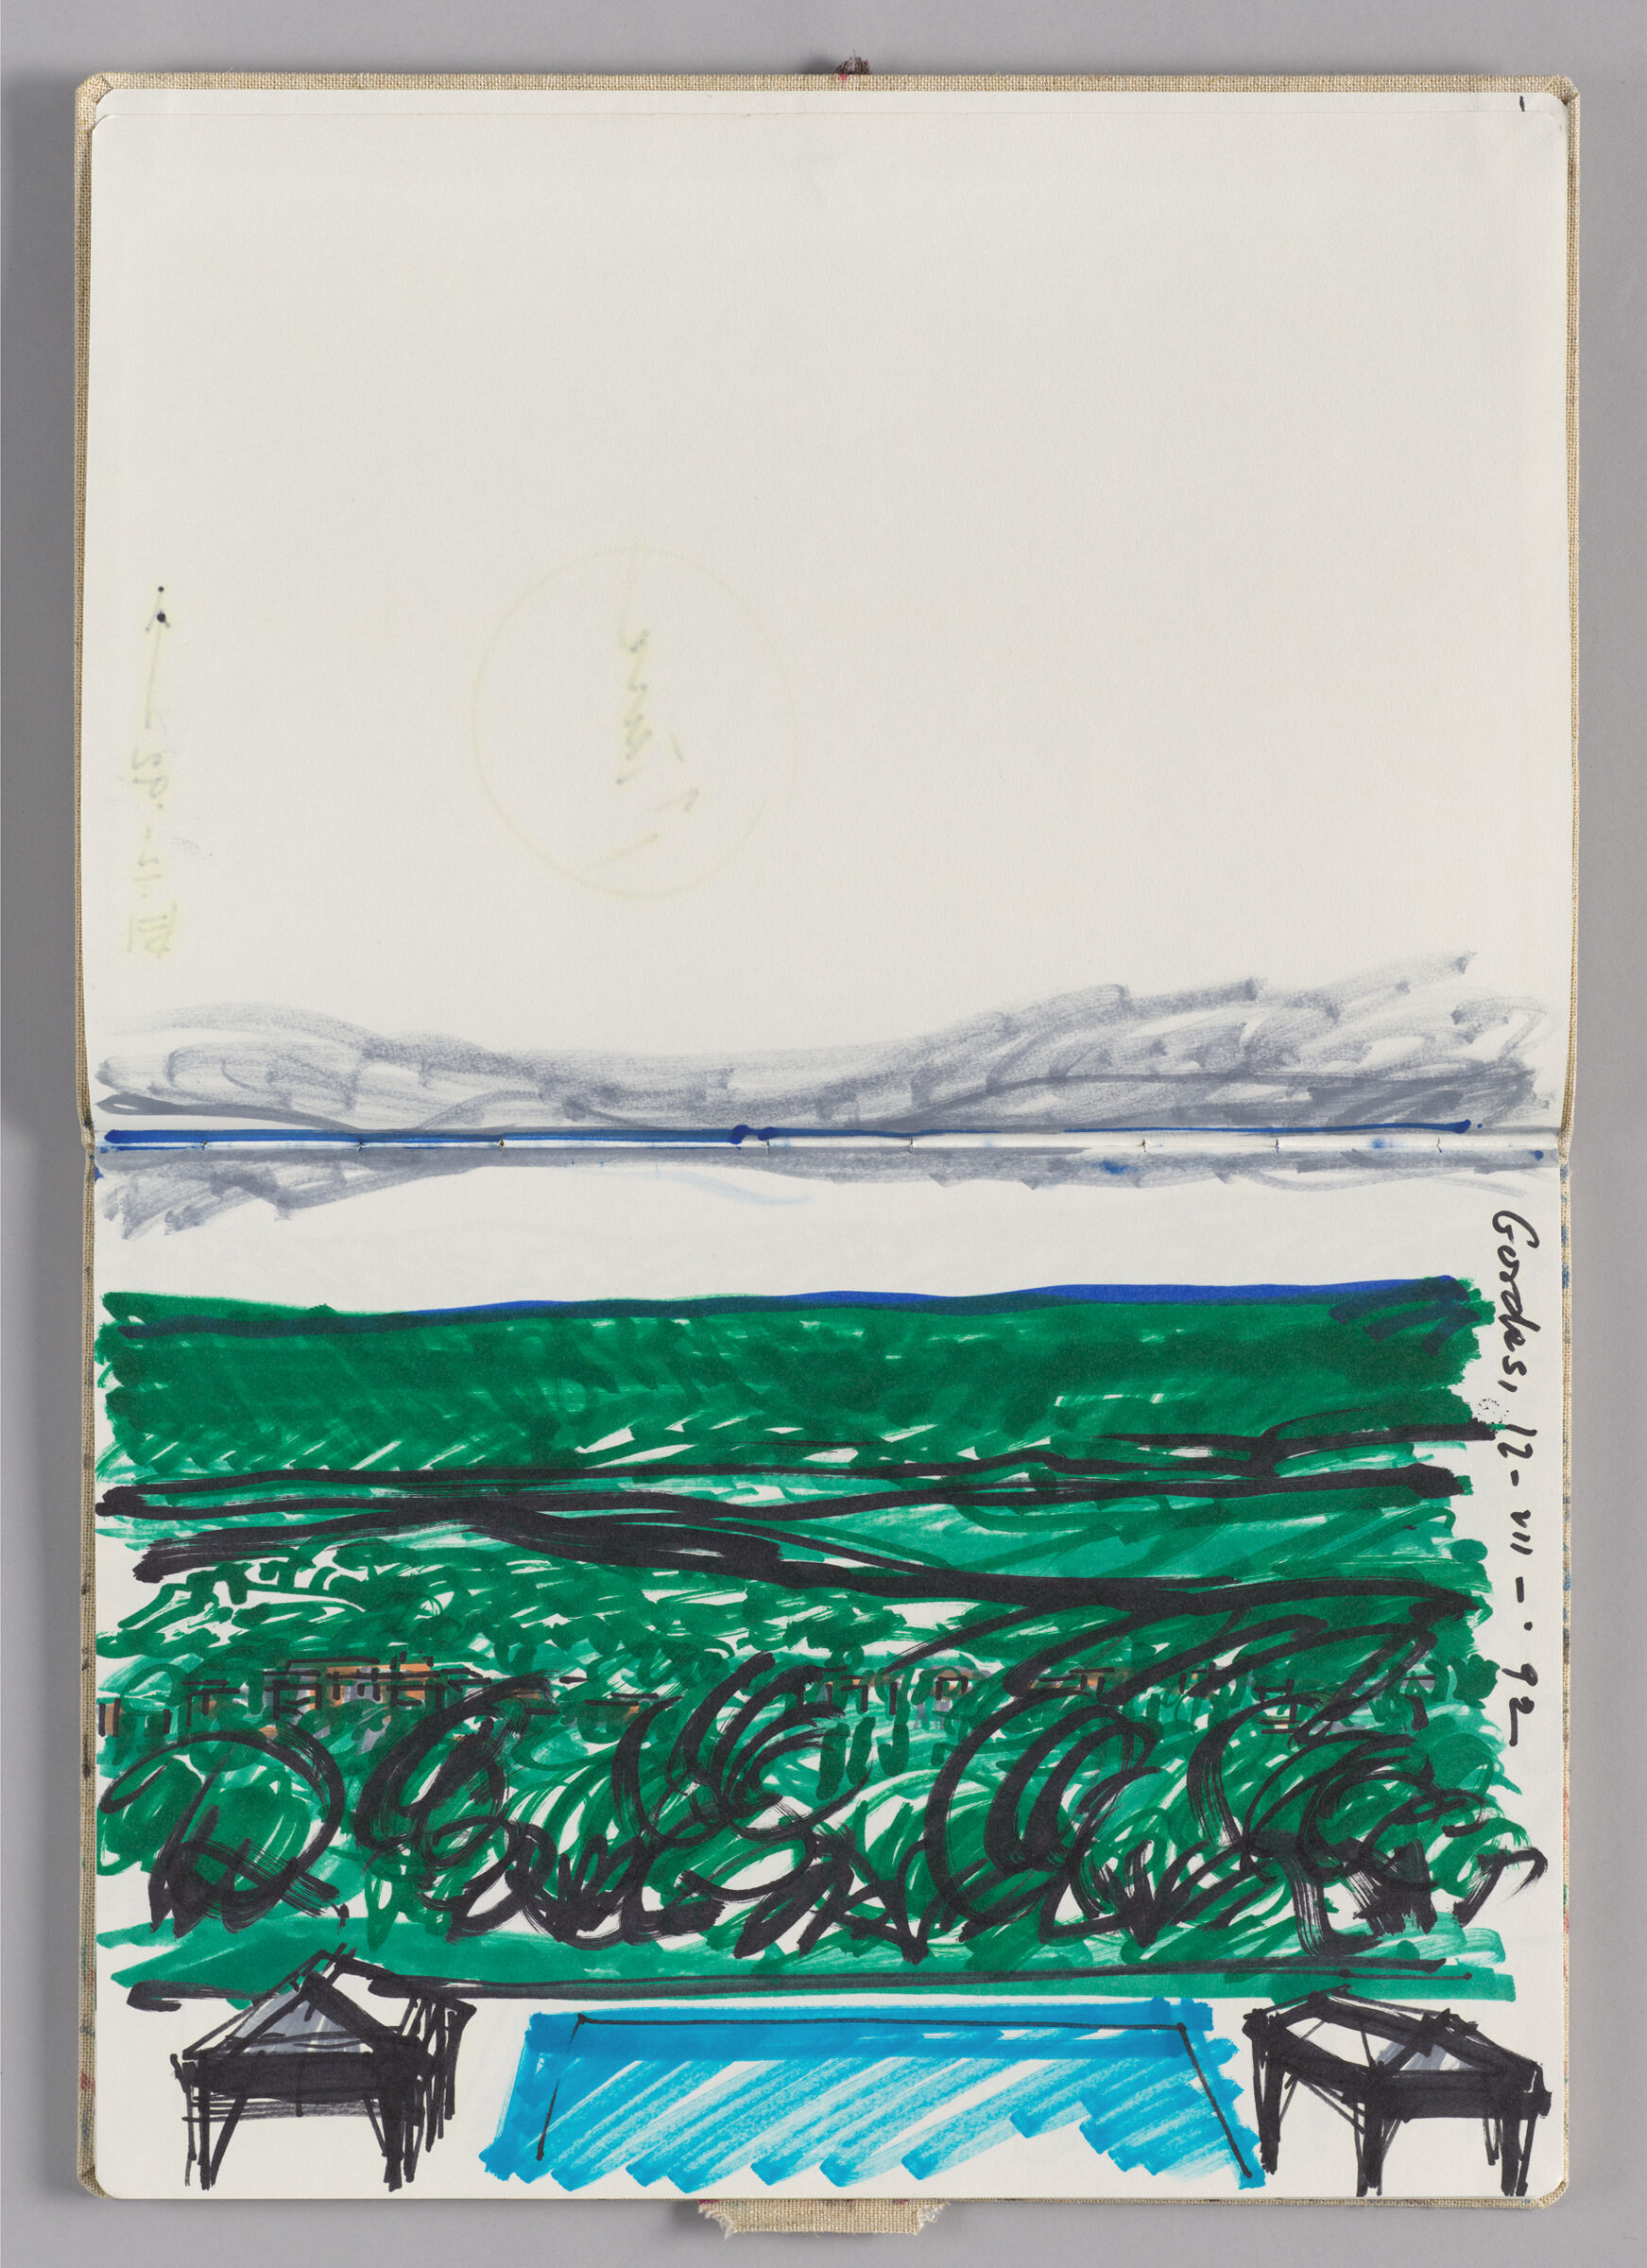 Untitled (Landscape With Pool, Two-Page Spread)